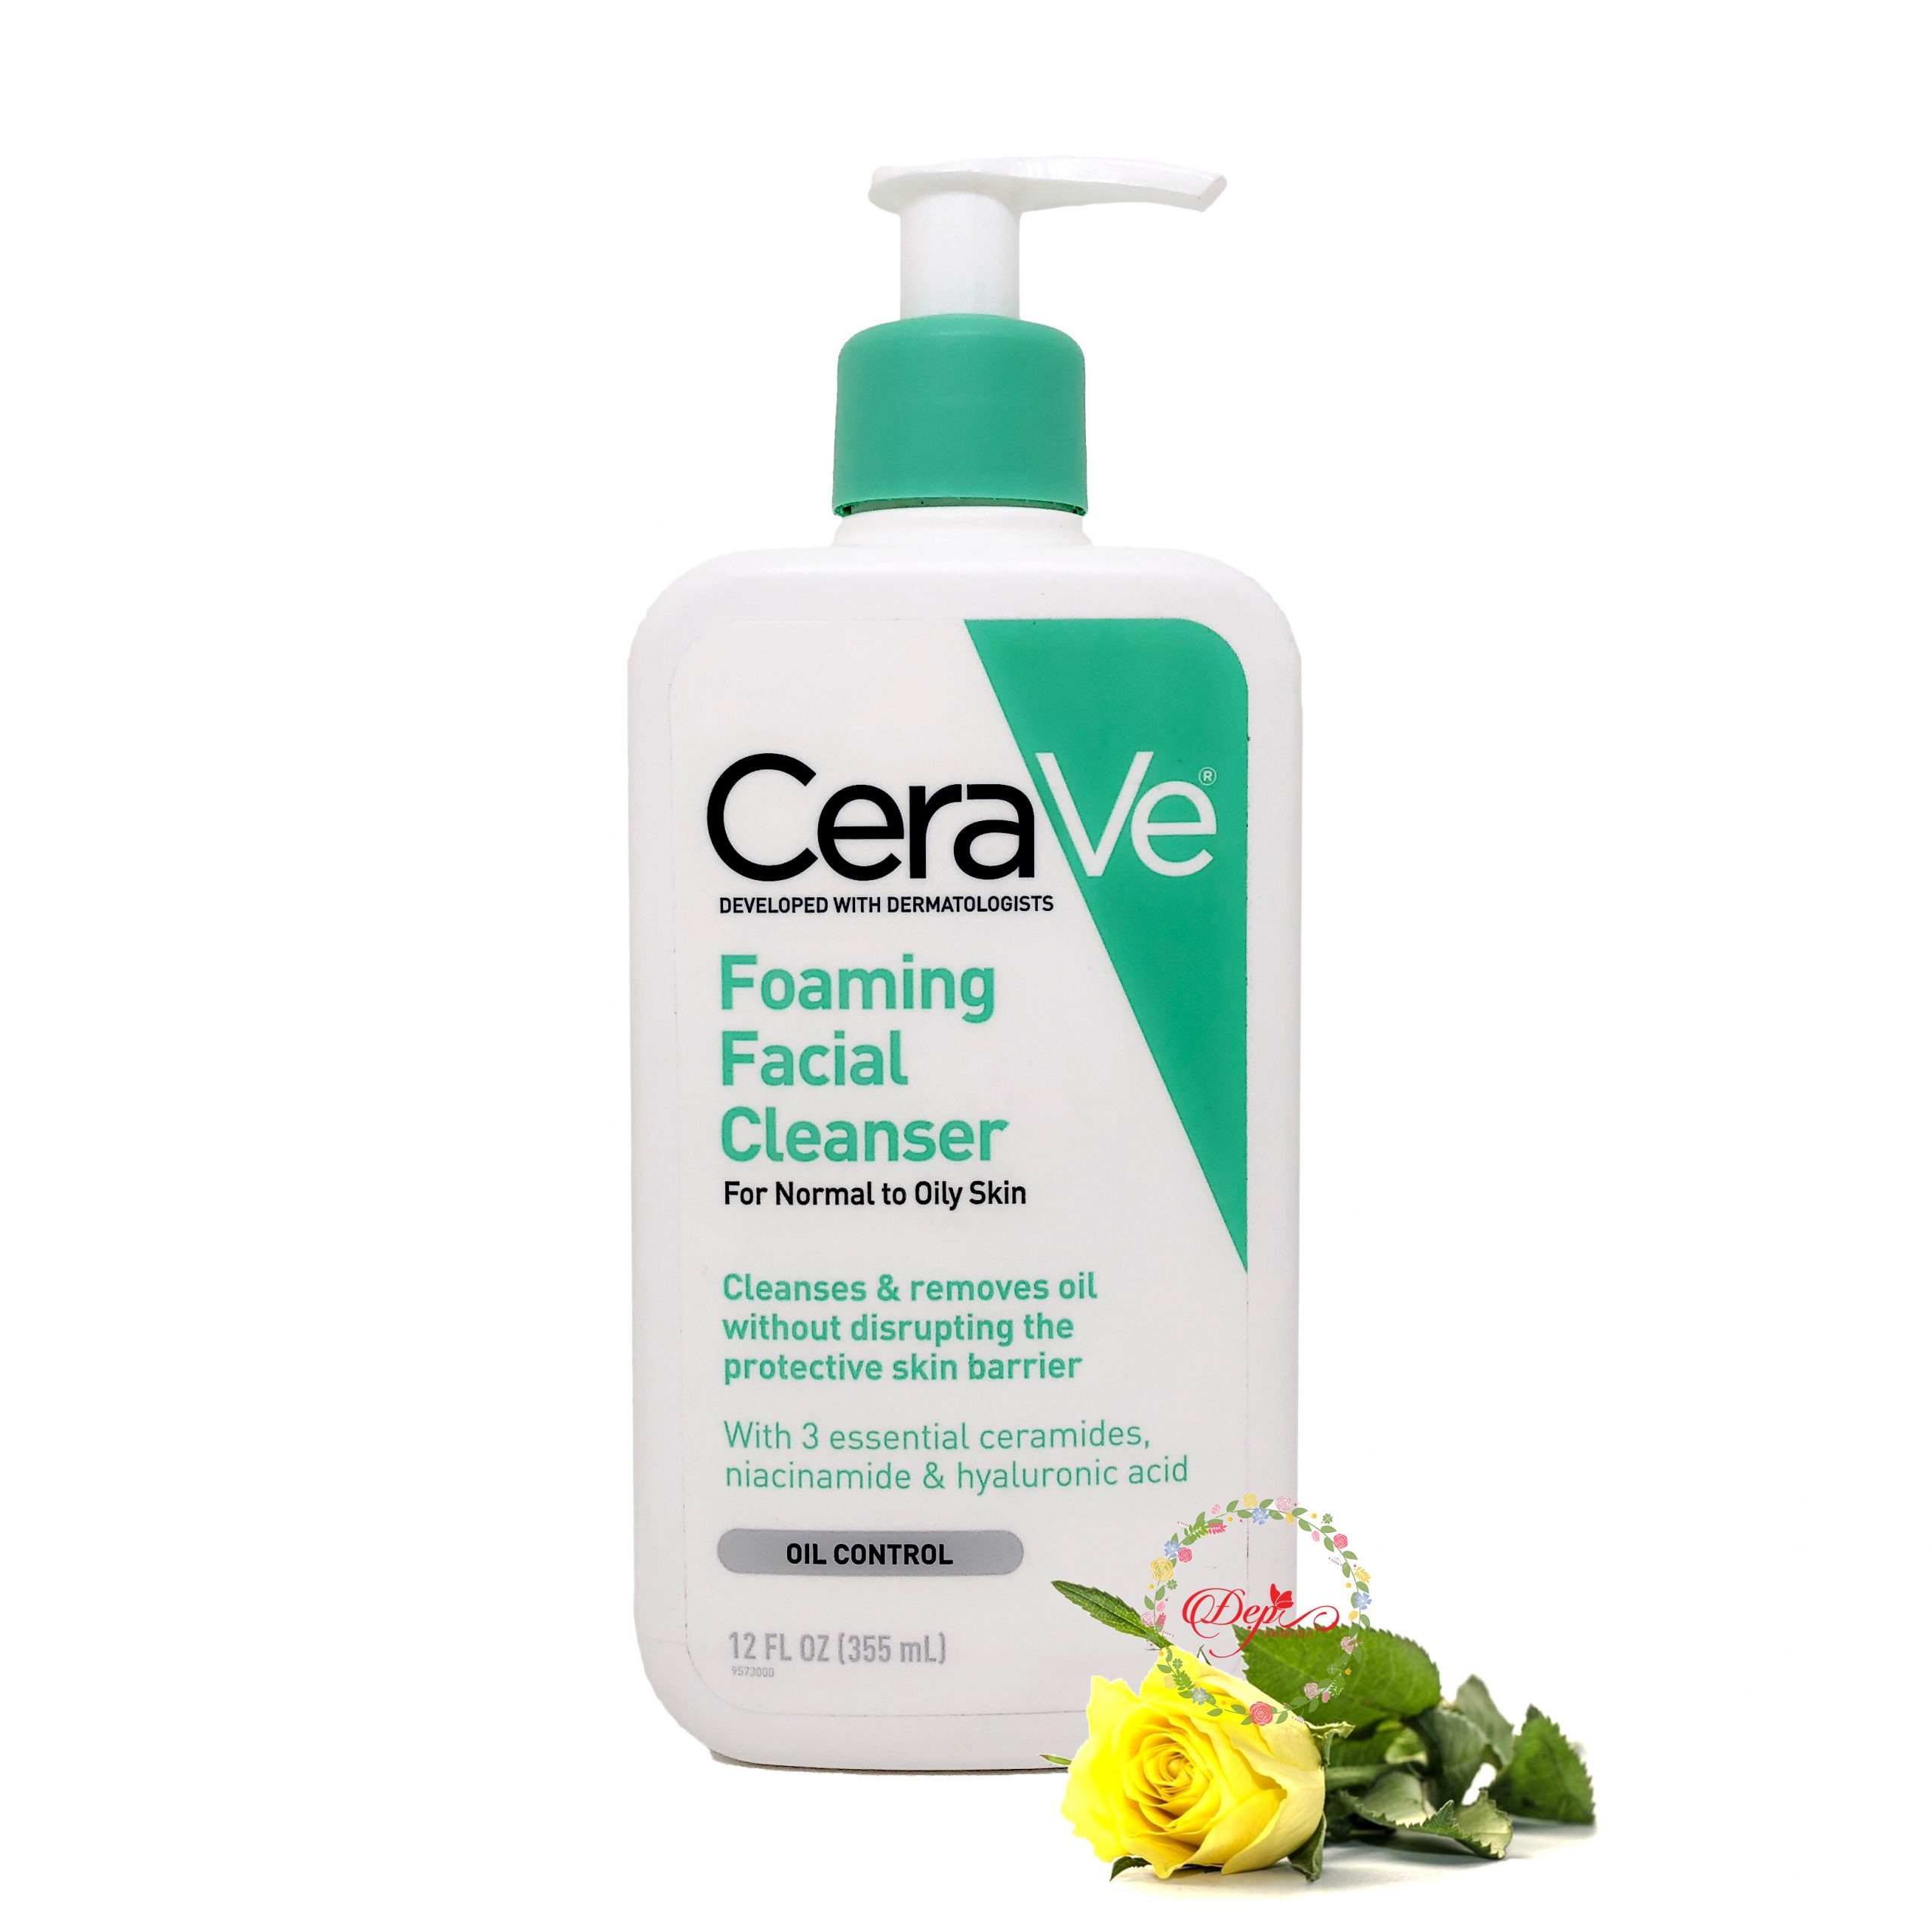 Review Cerave Foaming Facial Cleanser